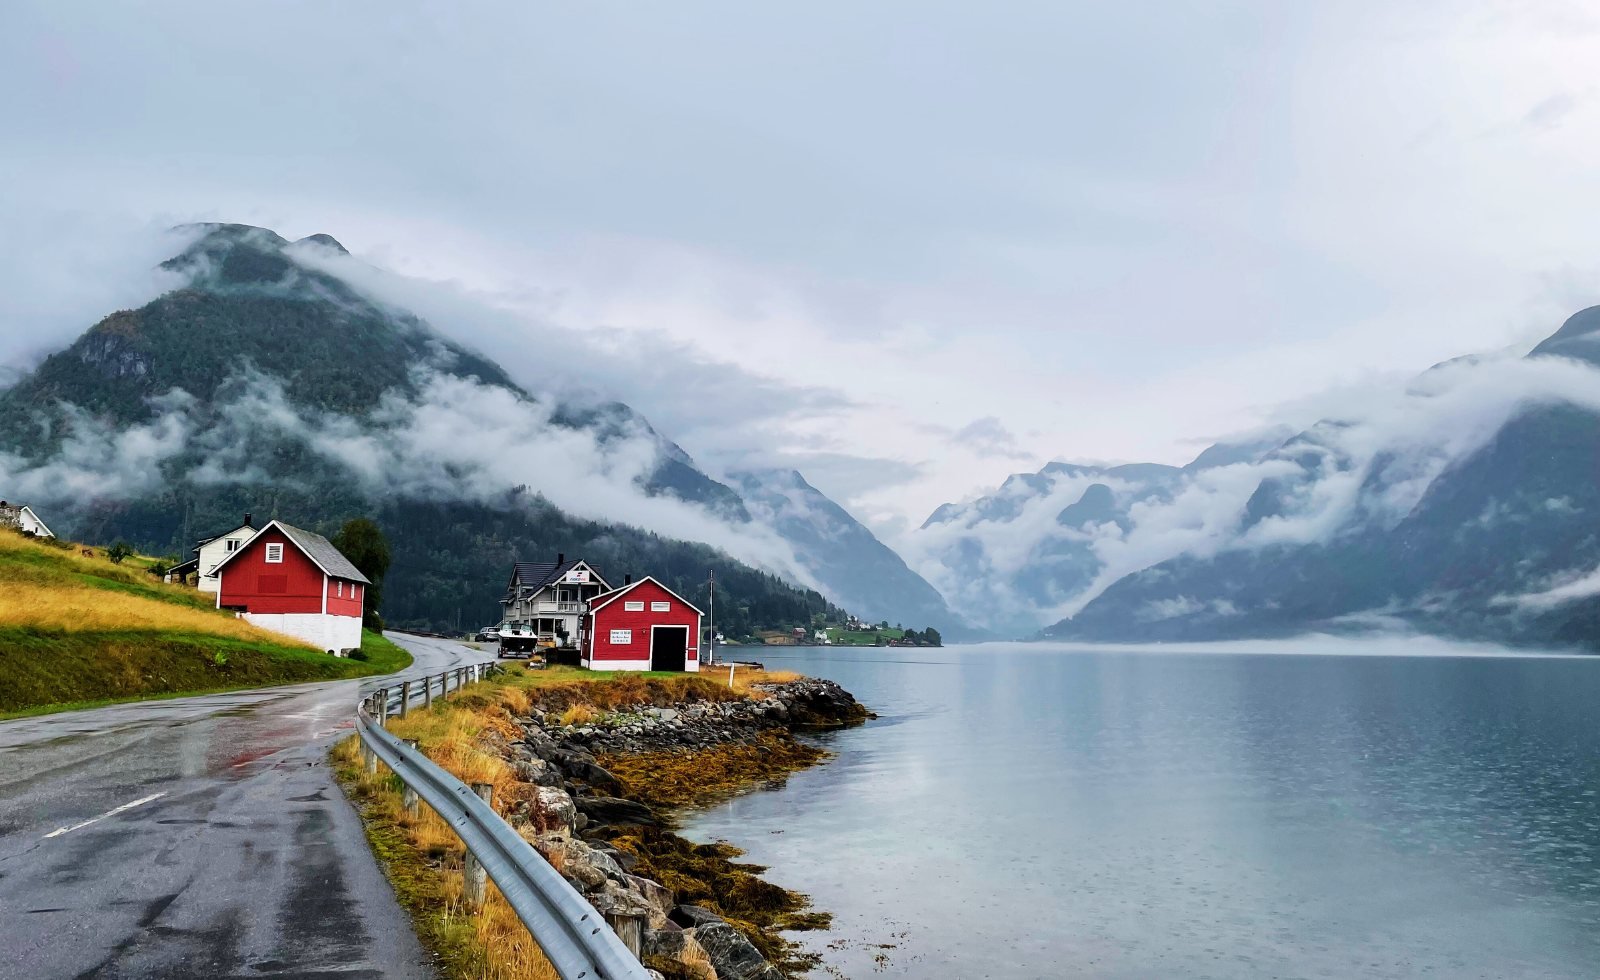 A stop on the Gaularfjellet scenic road trip in Norway. Photo: David Nikel.